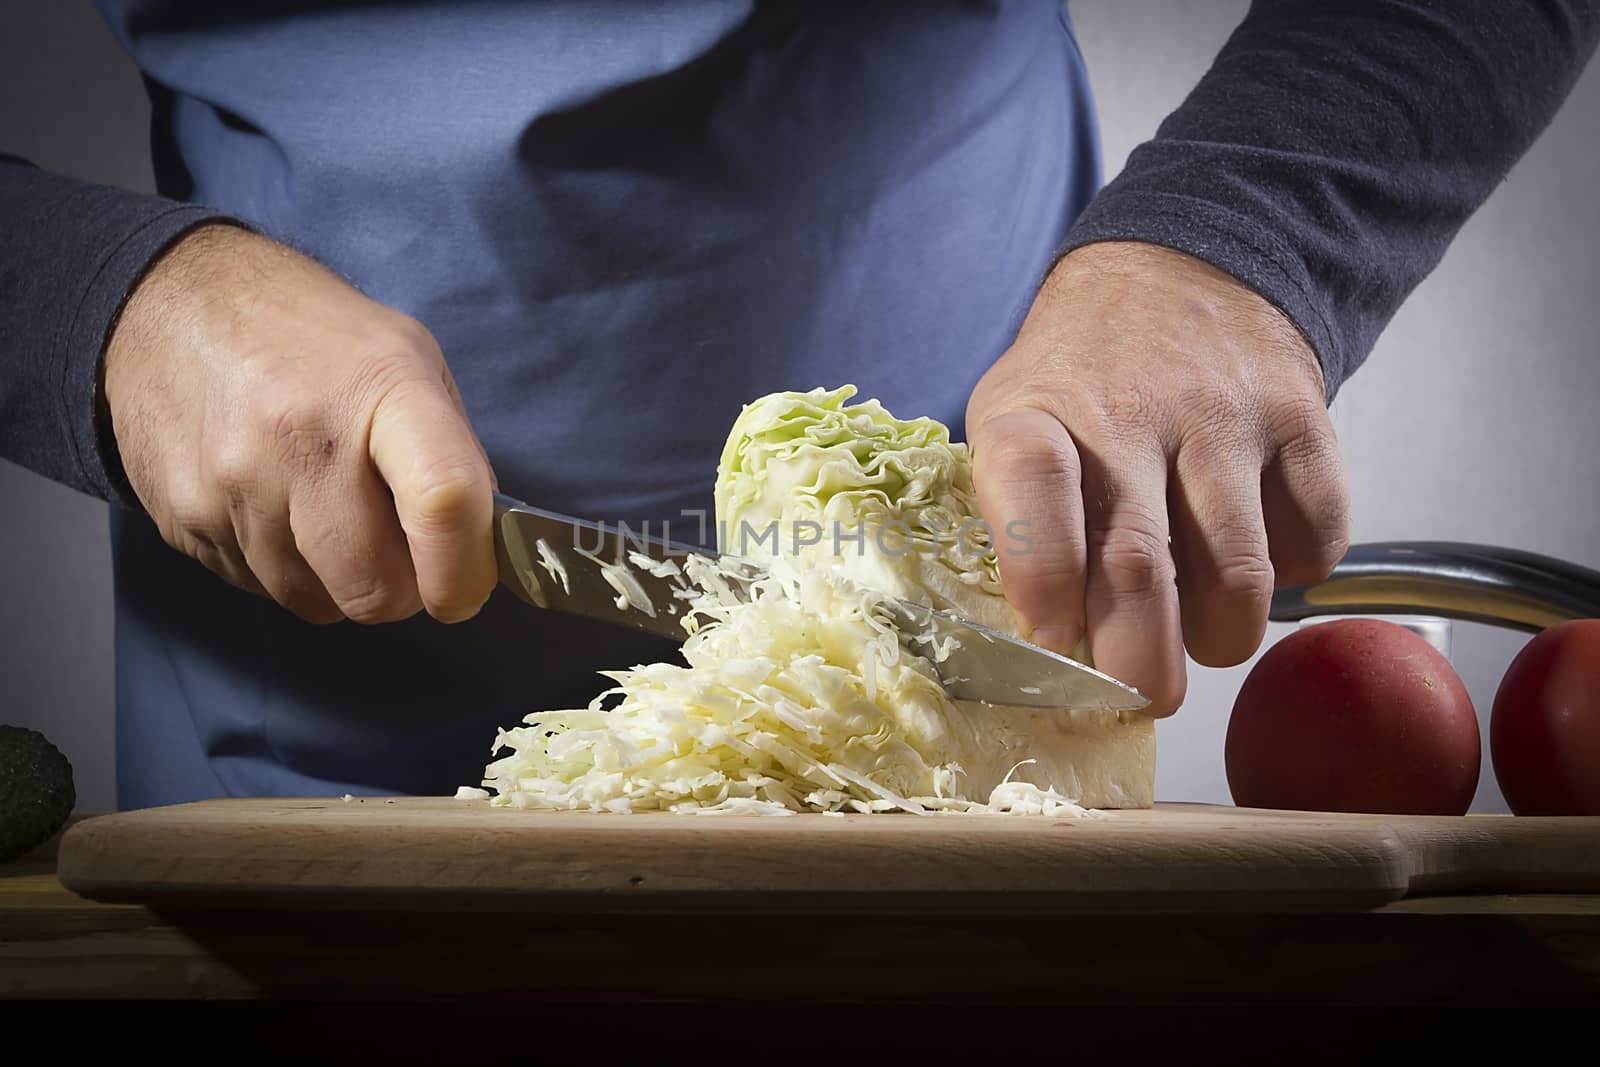 Hands with a knife chopping cabbage on the kitchen table